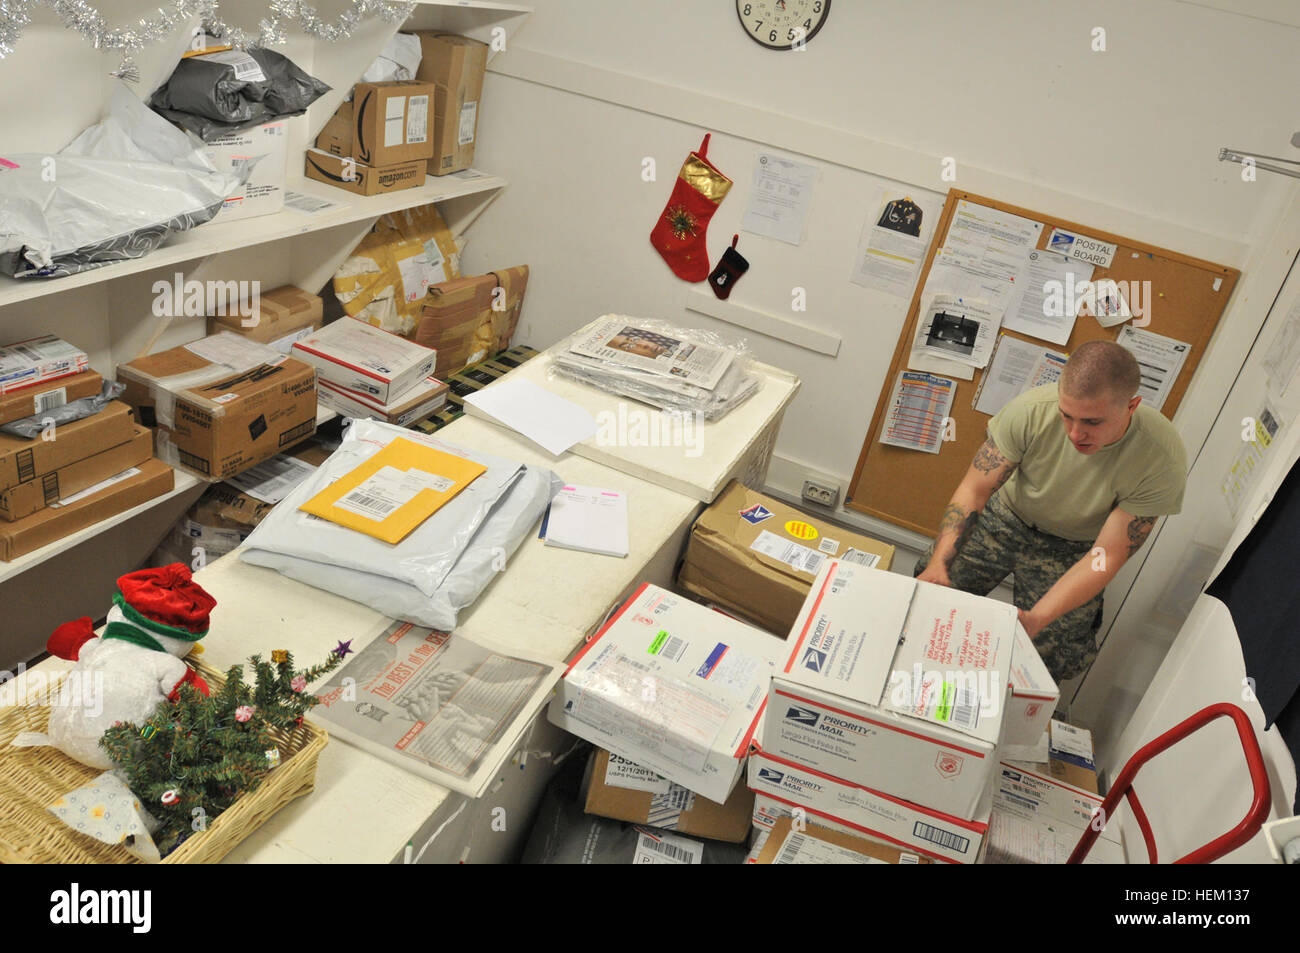 Pfc. Clinton Glenn, a driver and administrative assistant from the Georgia Army National Guard assigned to Multinational Battle Group - East, sorts through stacks of mail. Spreading holiday cheer is busy work 111212-A-VX723-002 Stock Photo